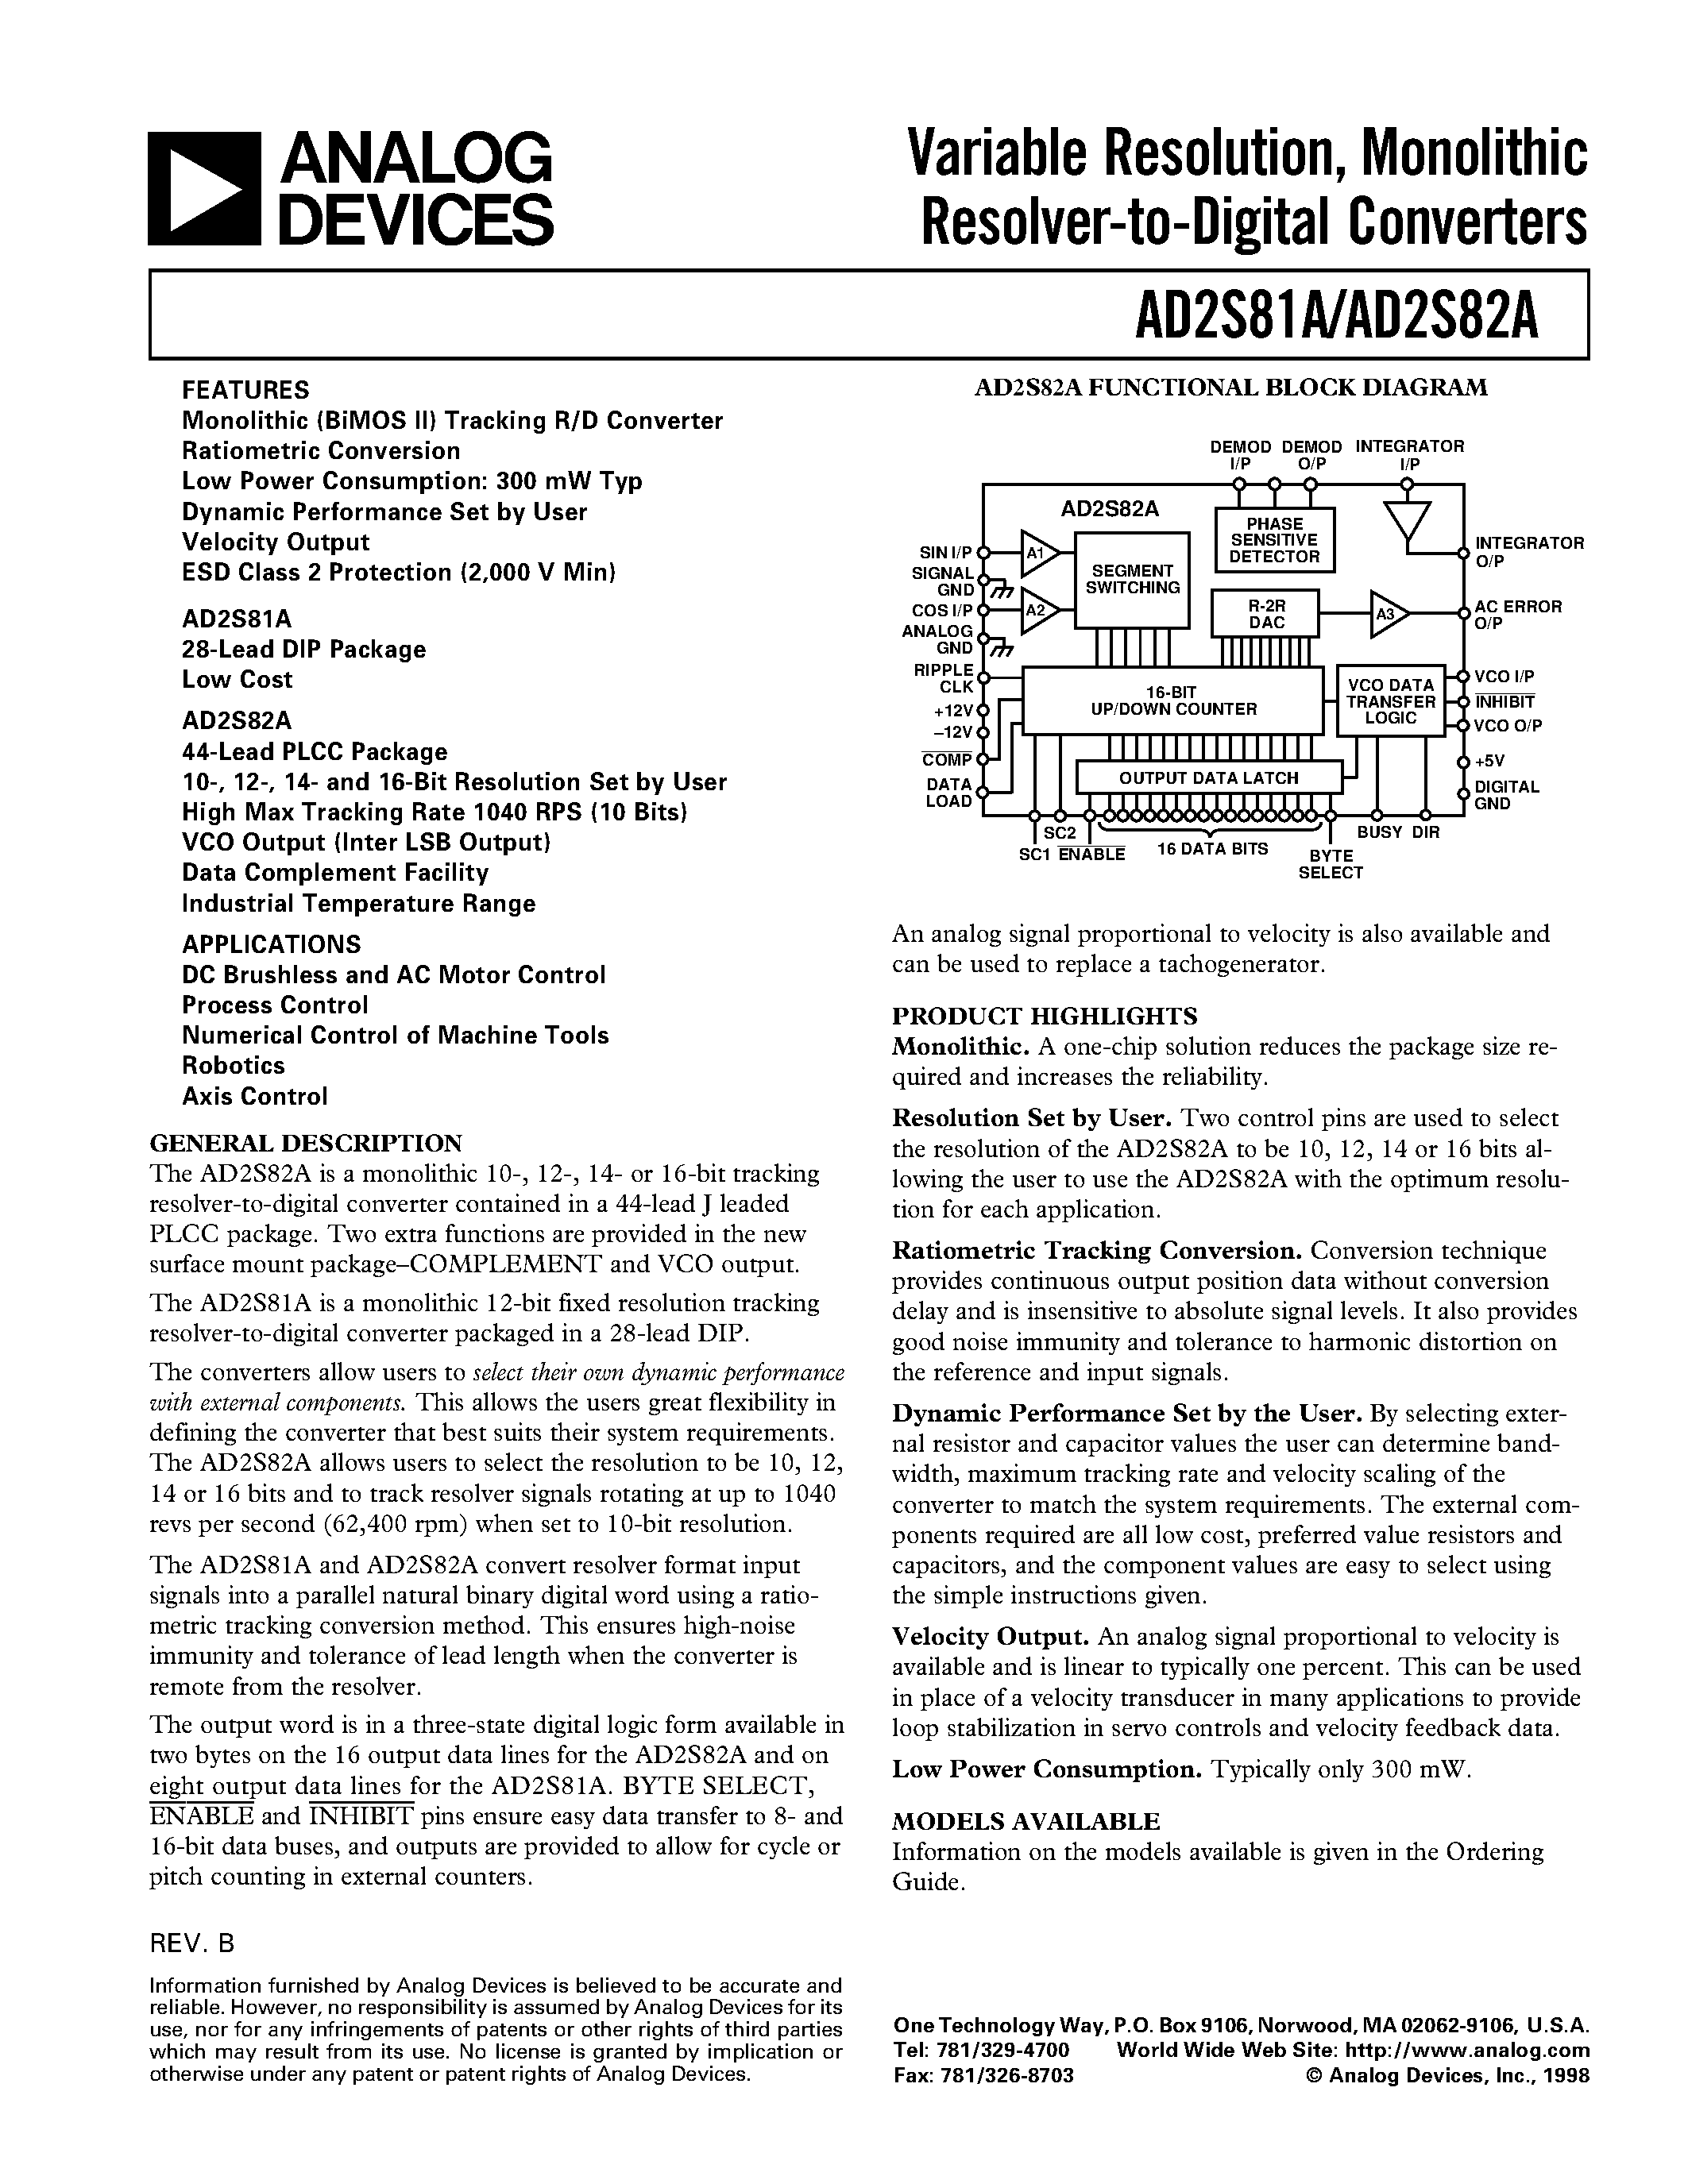 Datasheet AD2S82AJP - Variable Resolution/ Monolithic Resolver-to-Digital Converters page 1